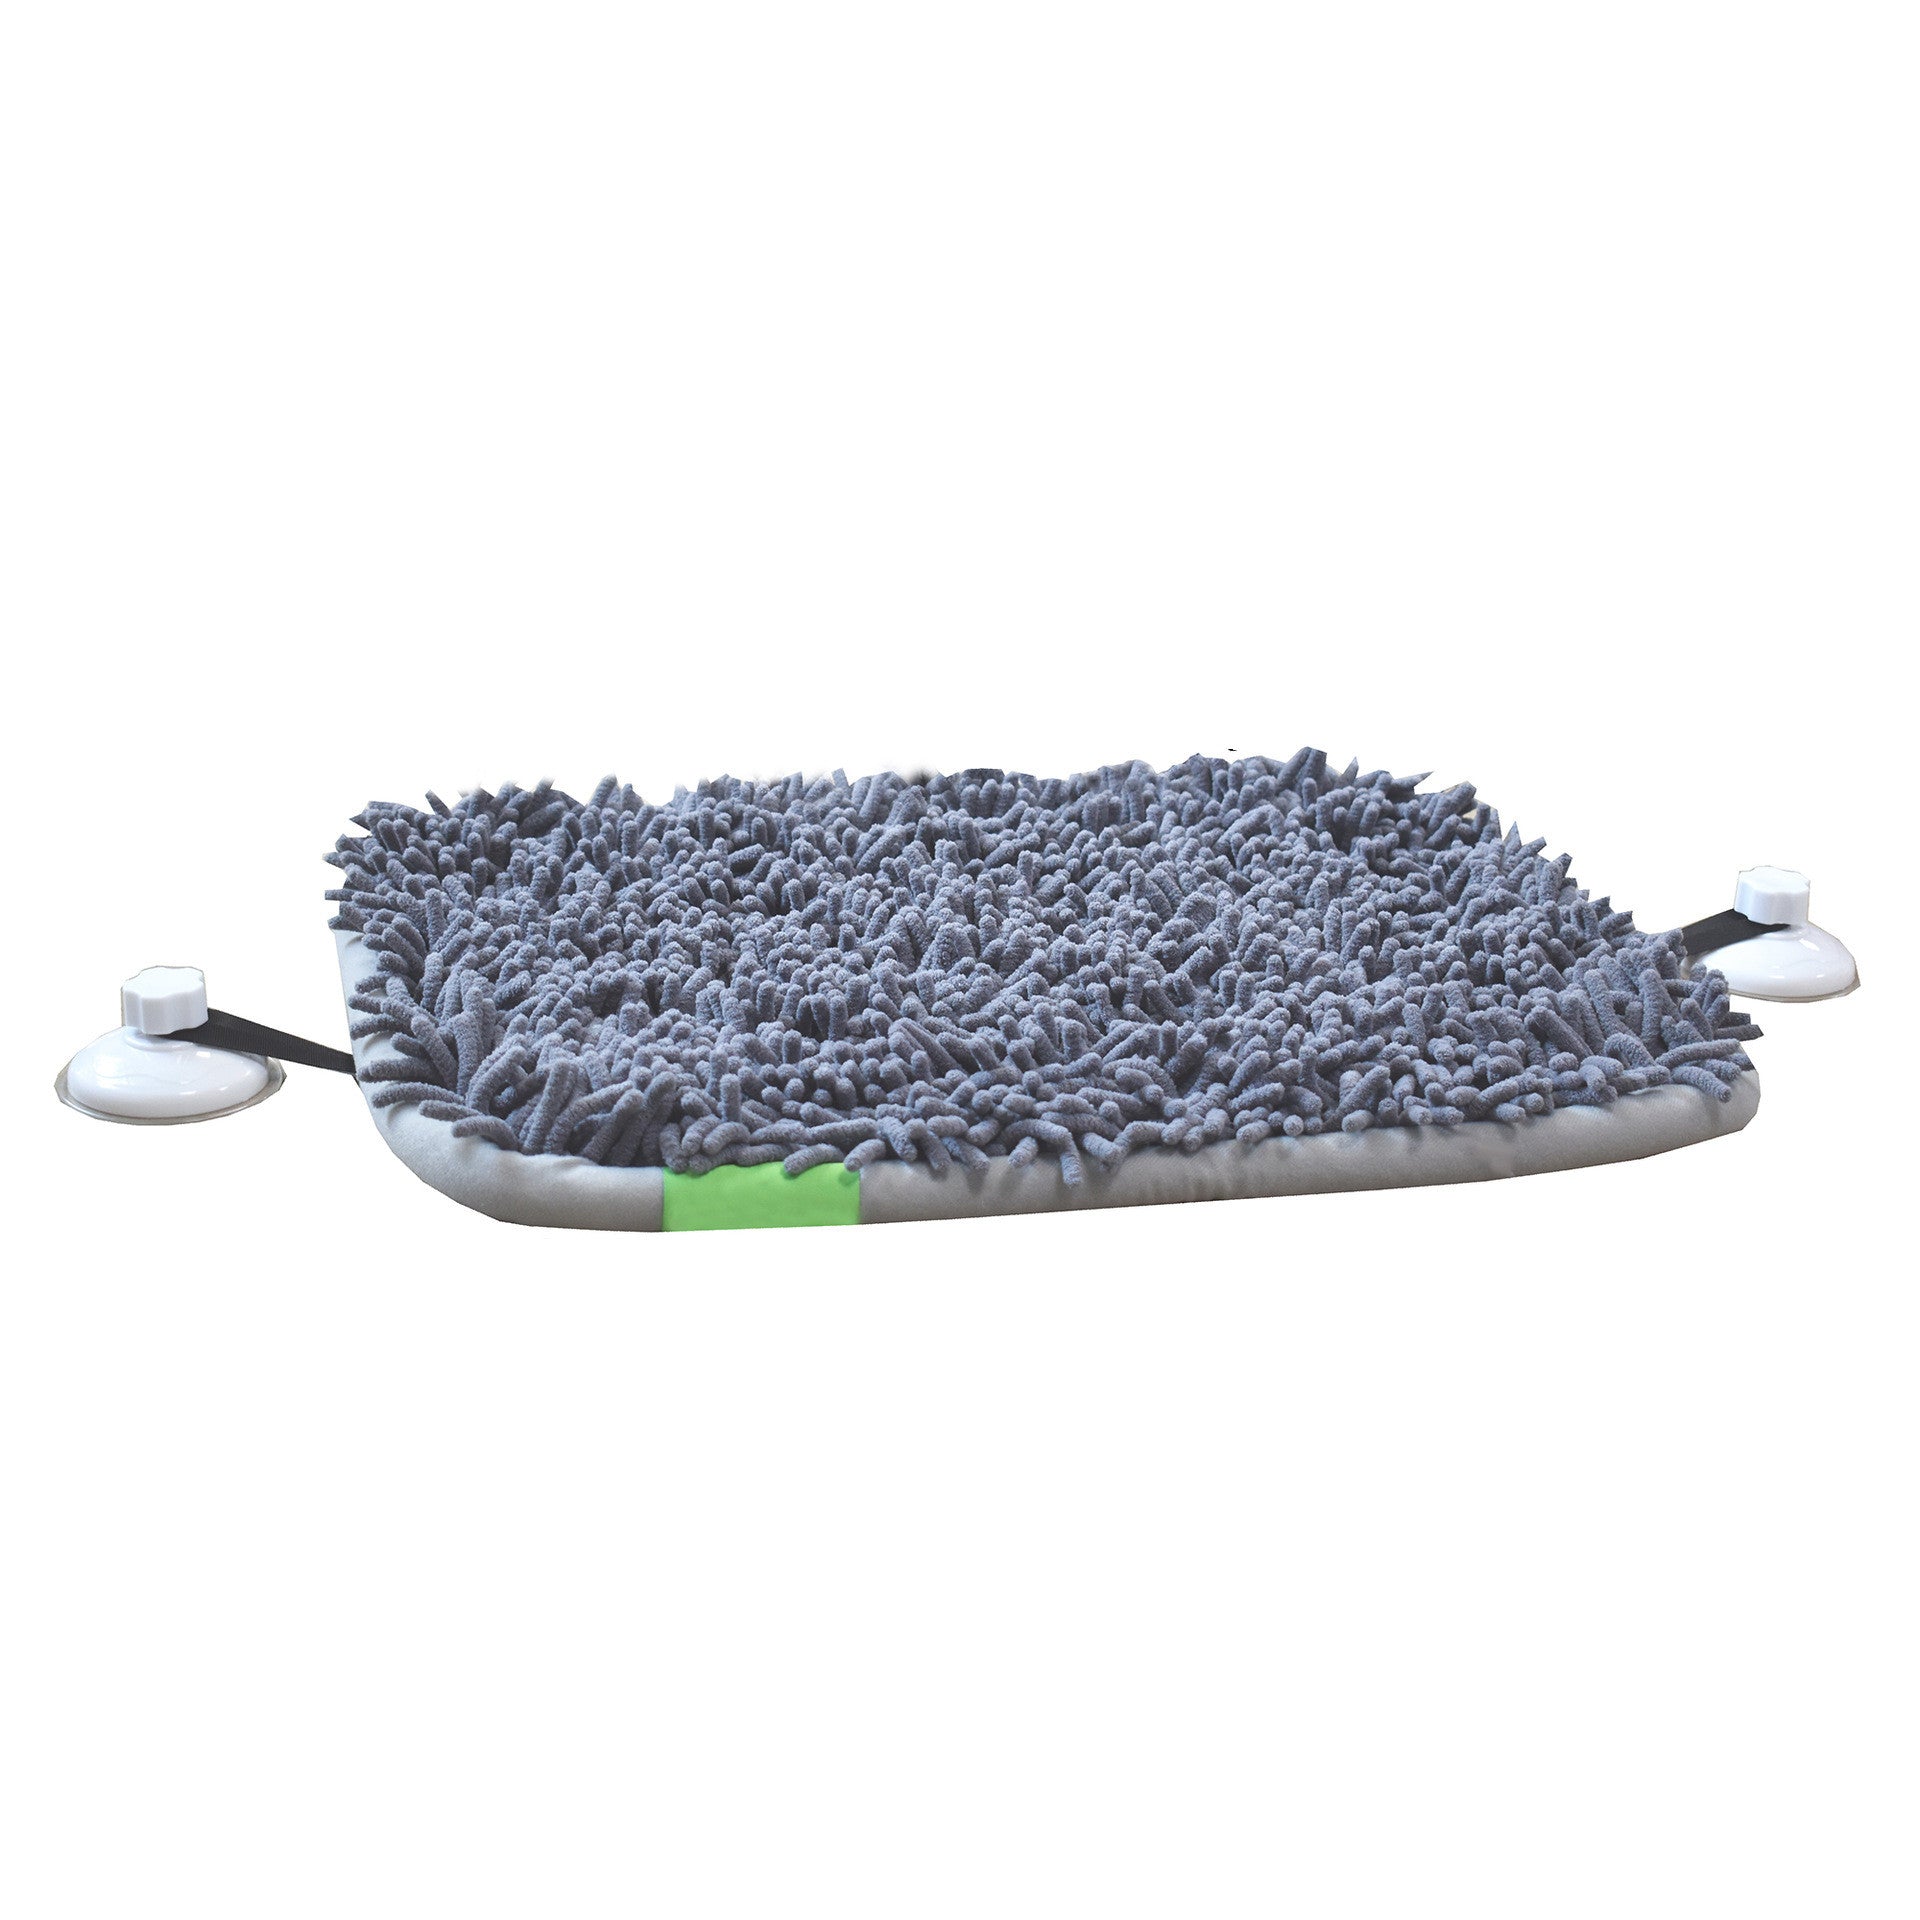 WOOZAPET Snuffle Mat for Dogs Gray and Teal 